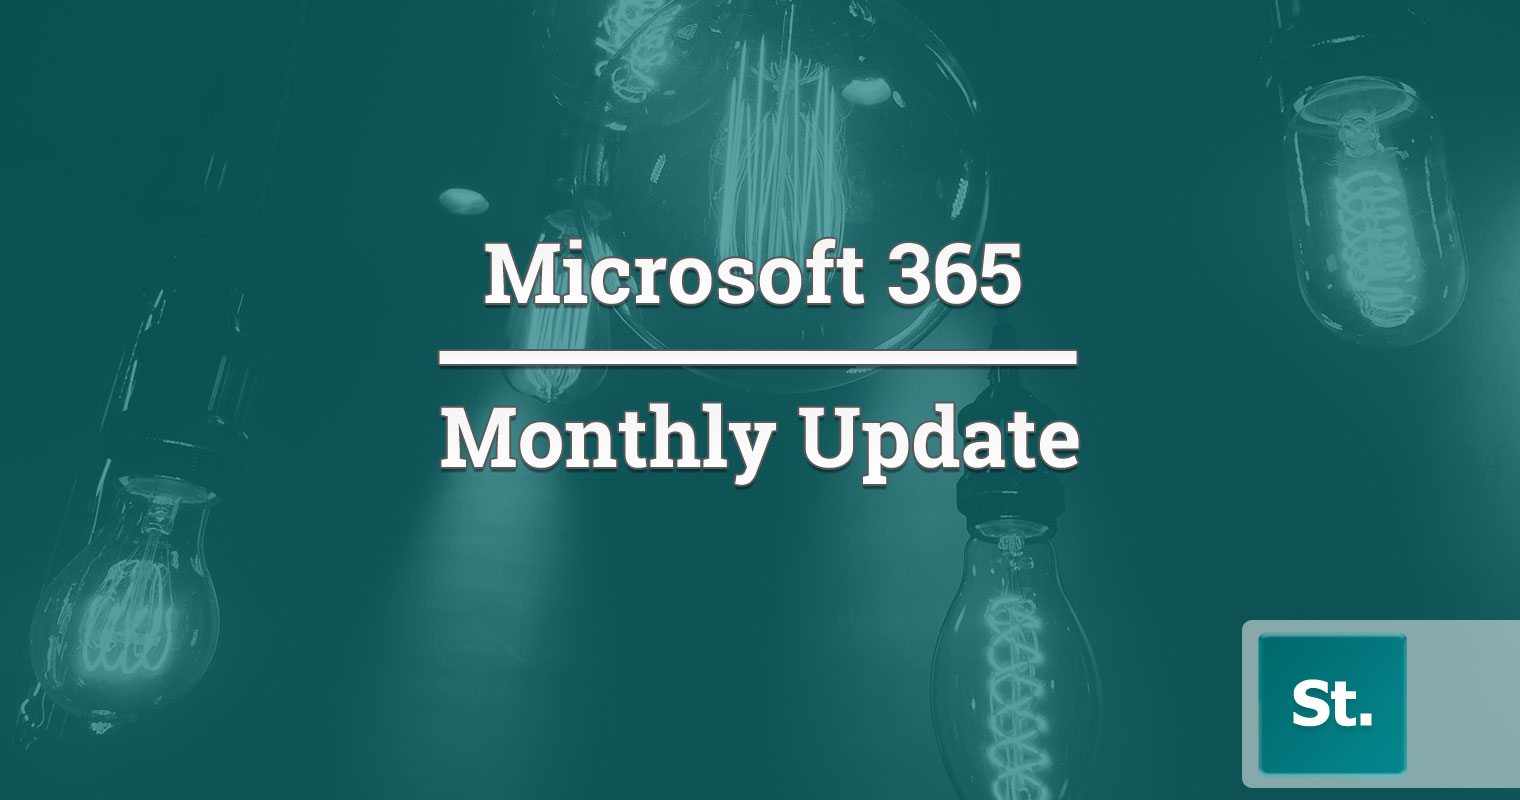 Microsoft 365 update for January 2020